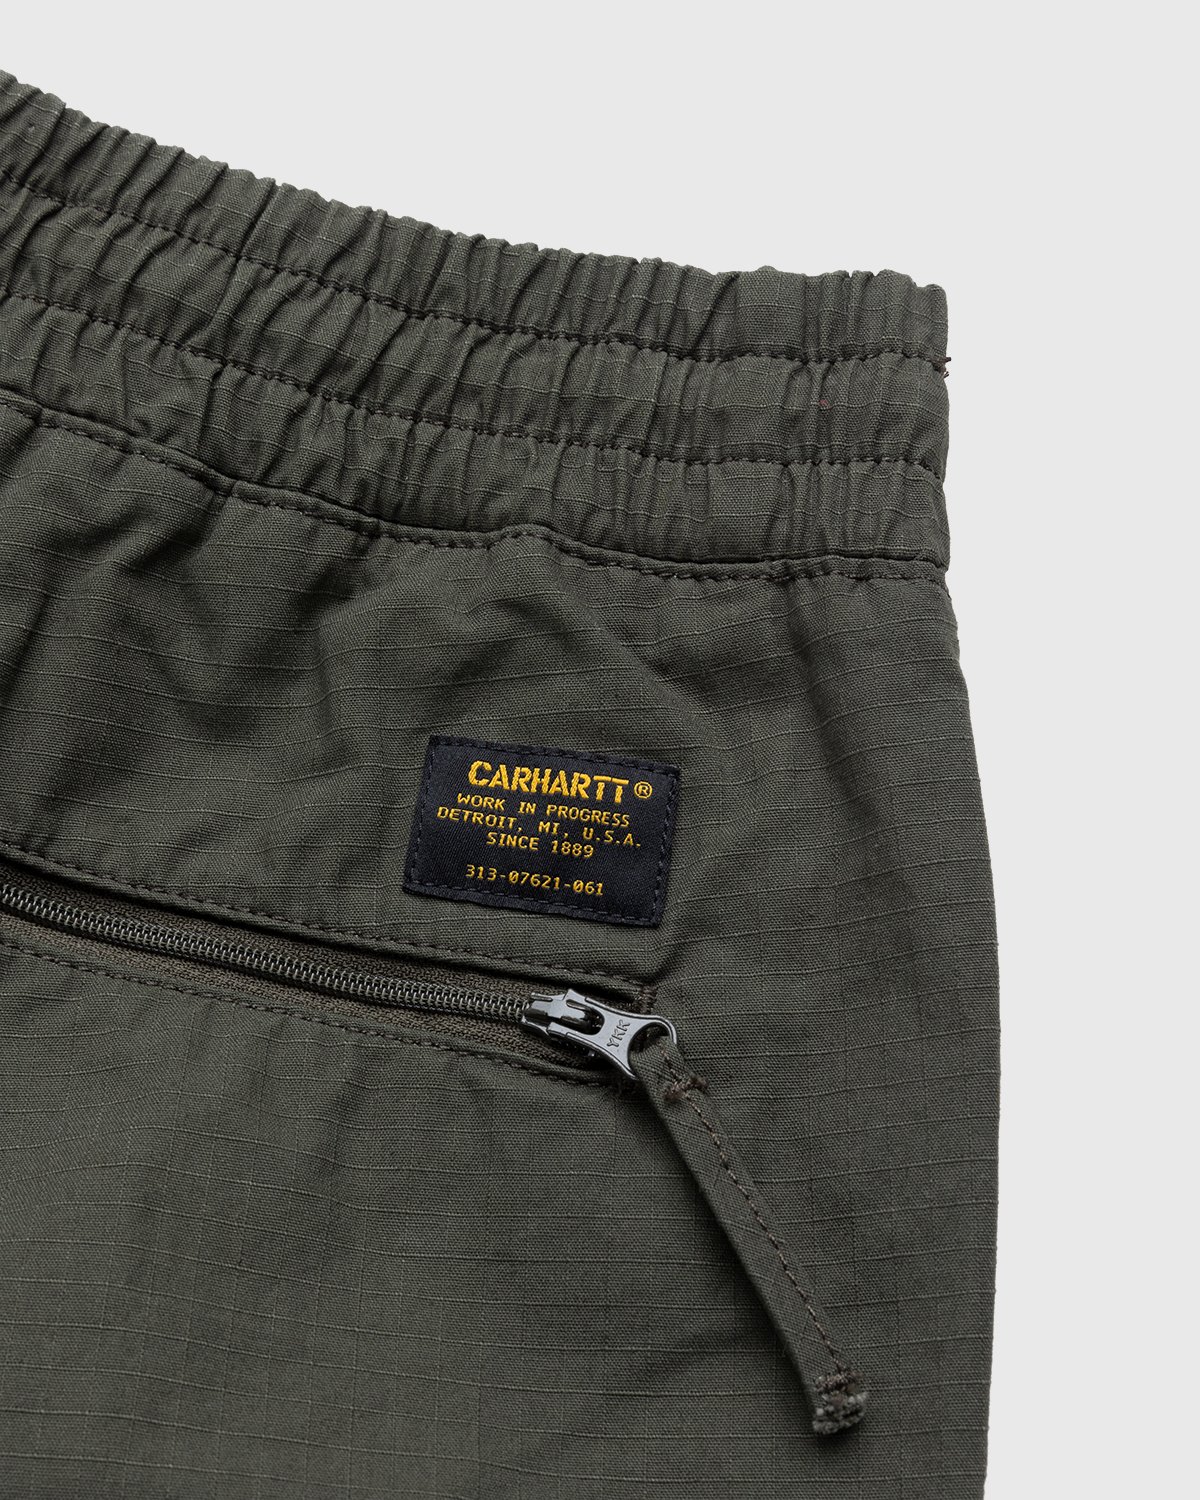 Carhartt WIP - Cargo Jogger Cypress Rinsed - Clothing - Green - Image 3